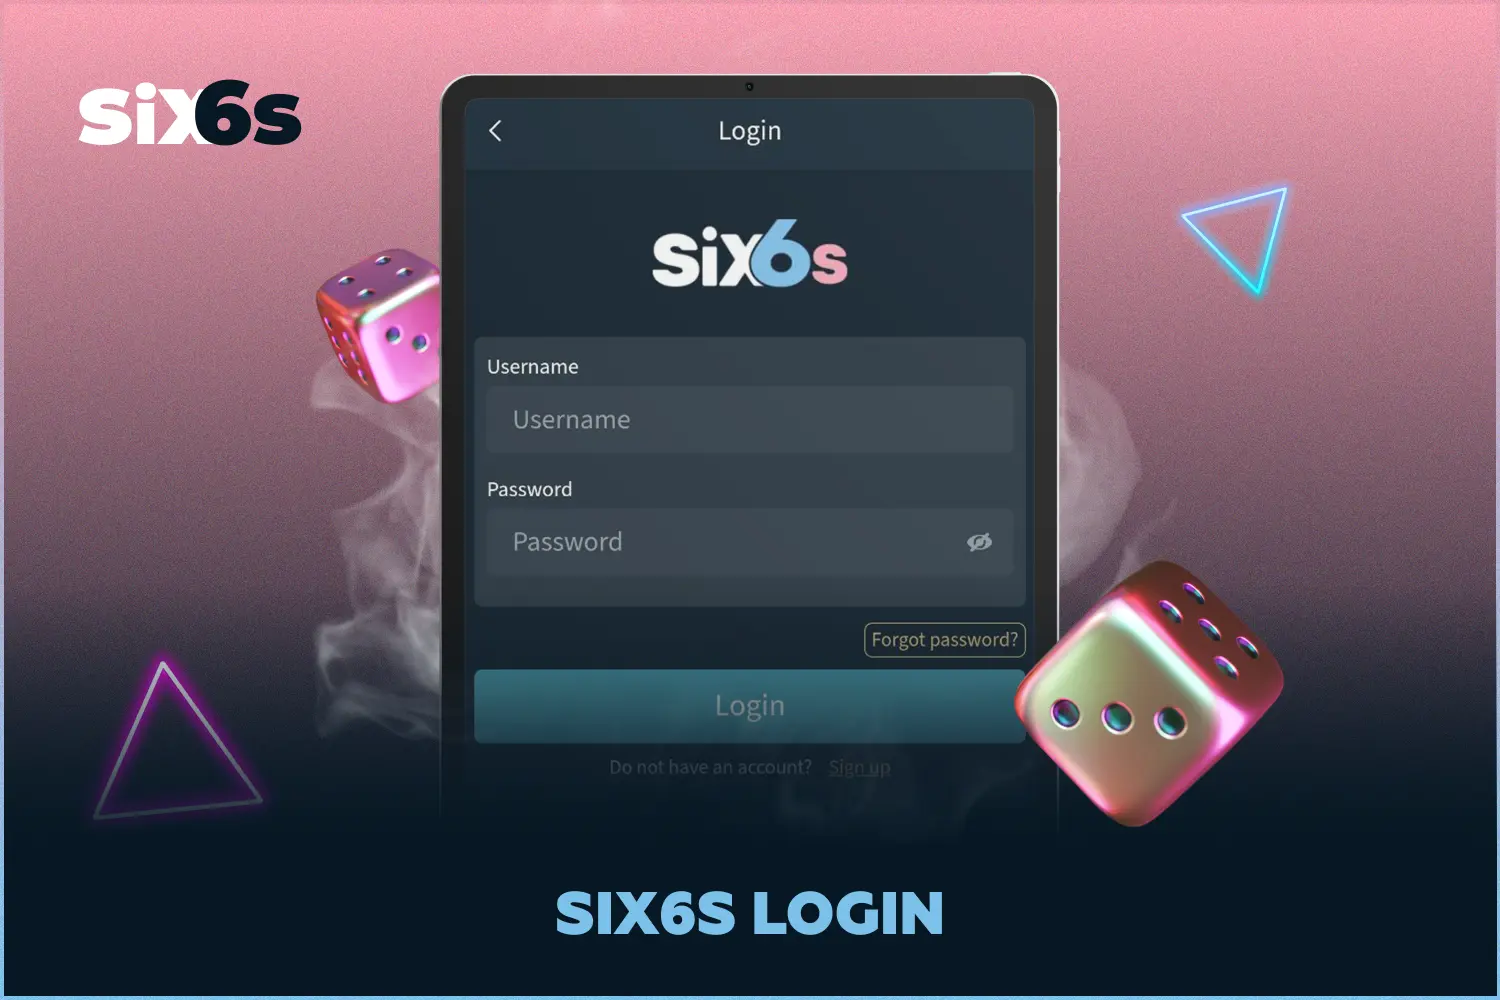 Once logged in to Six6s, players will have access to all the games and entertainment on the site